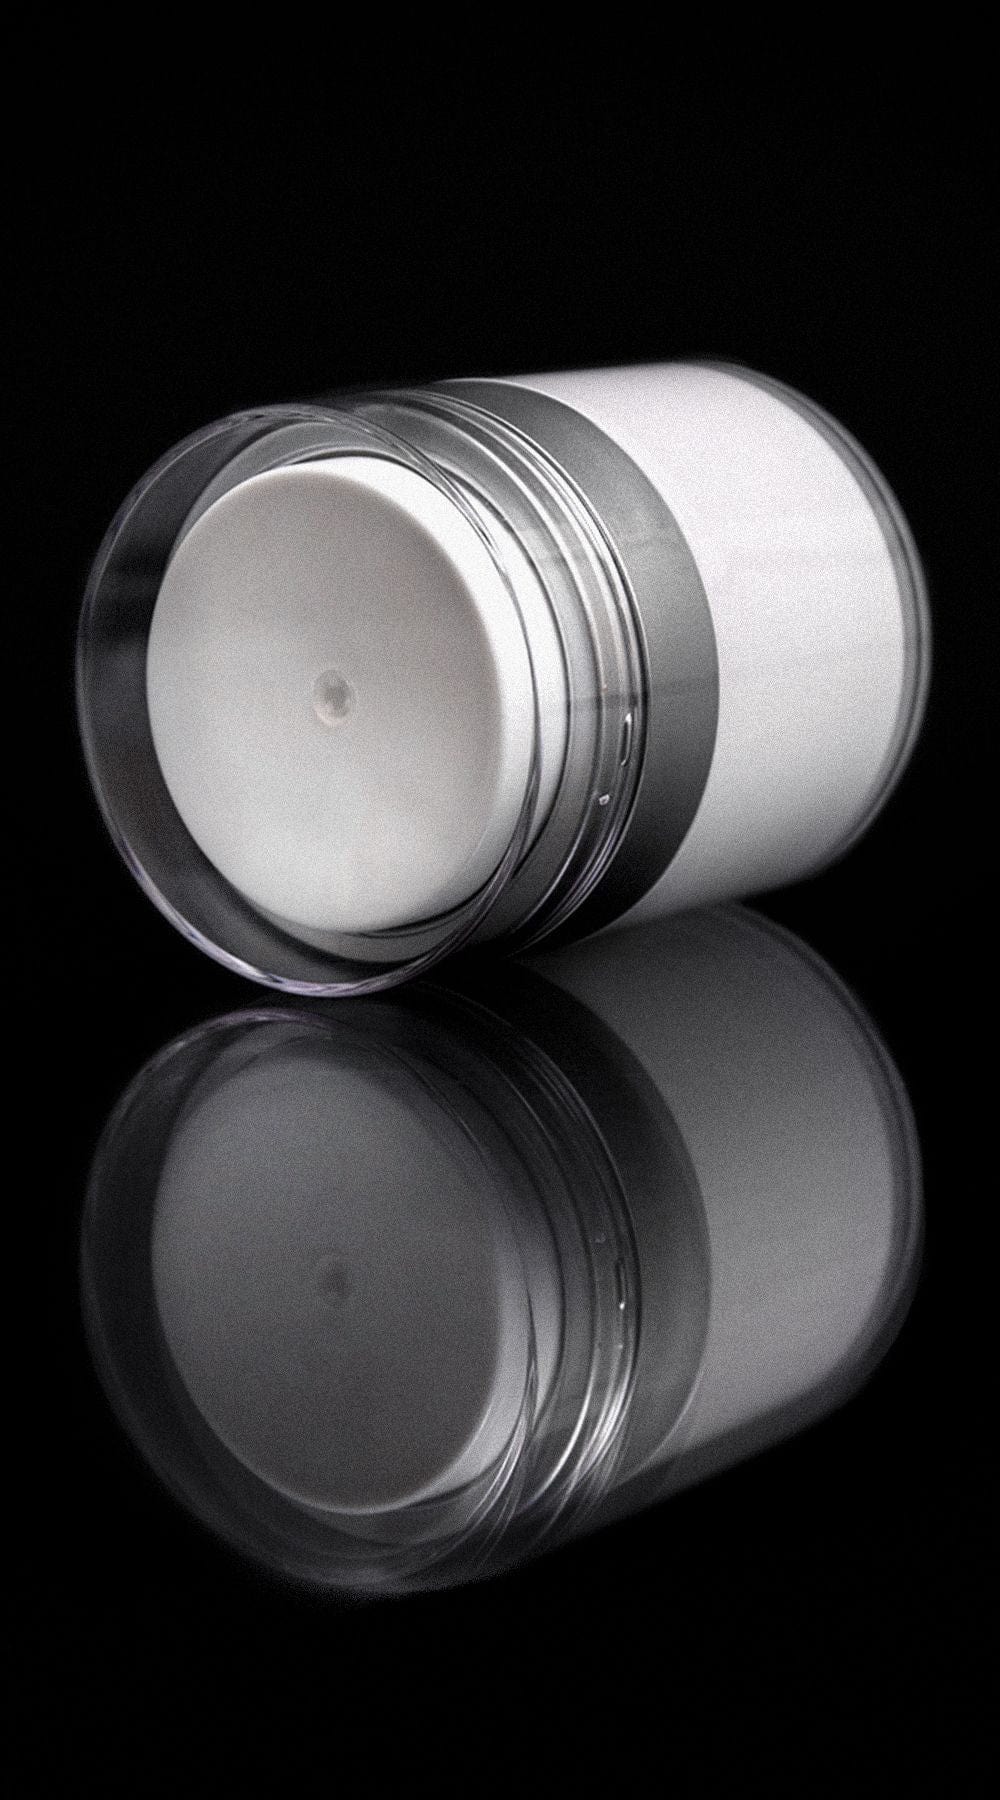 Echo 50 ML Airless Jar with Matte Silver Collar - Cosmetic Packaging Now